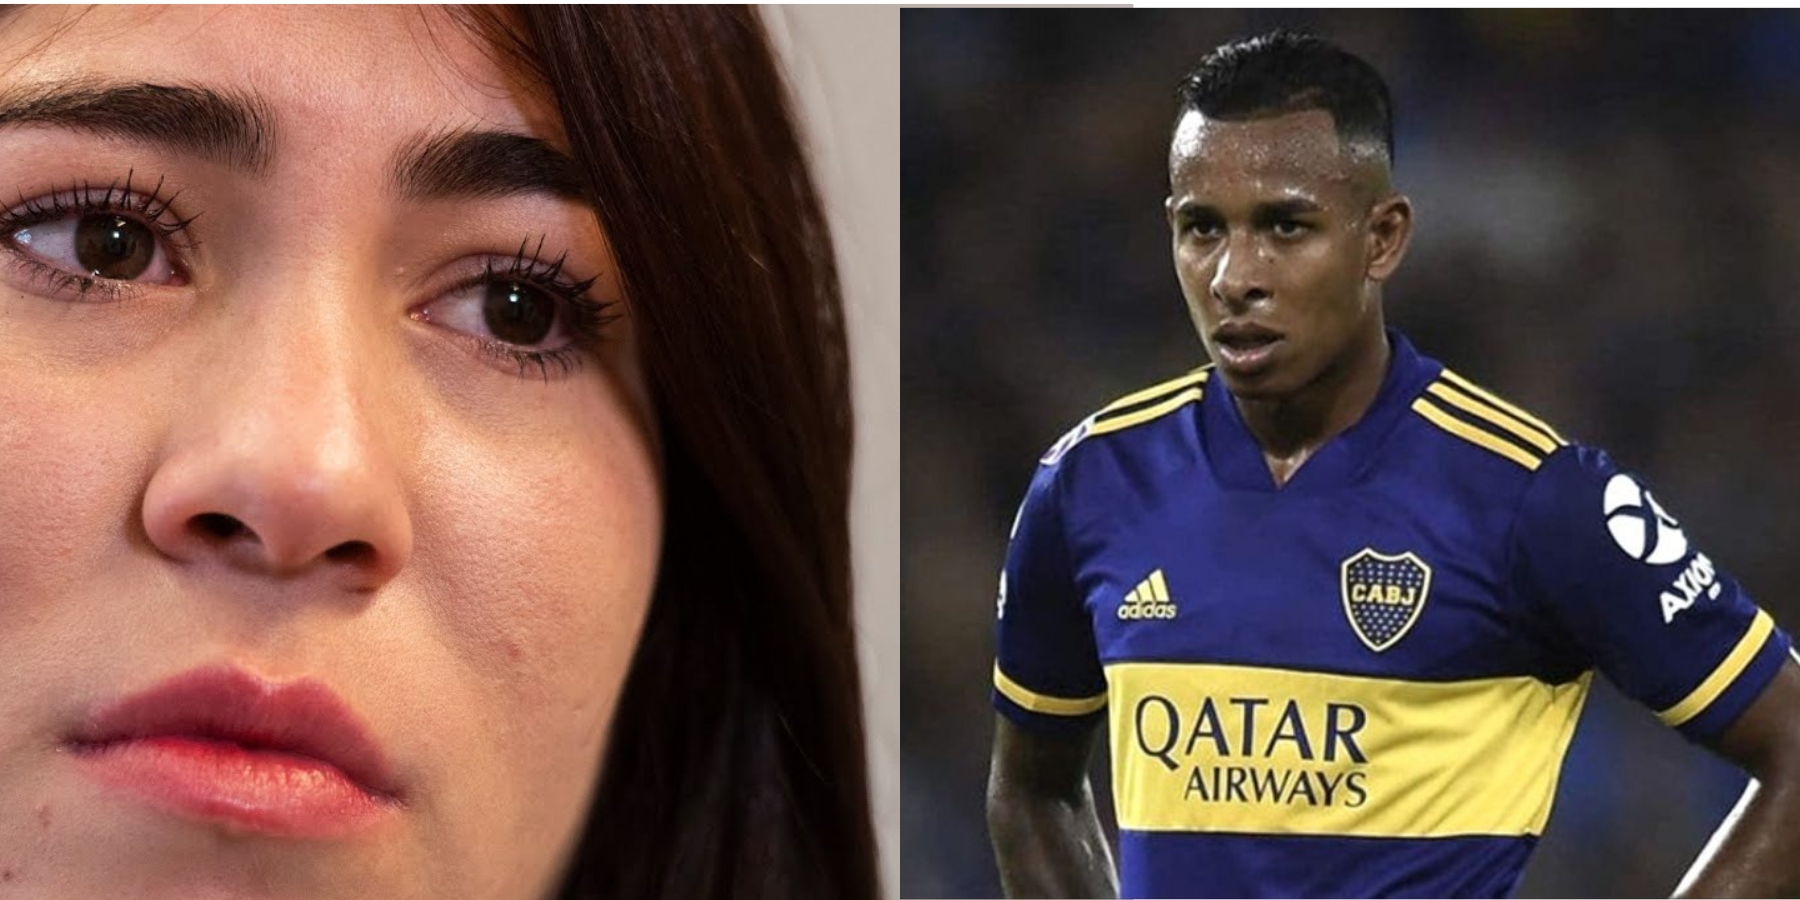 The woman spoke to the media about how difficult the entire episode with the Colombian soccer player has been for her